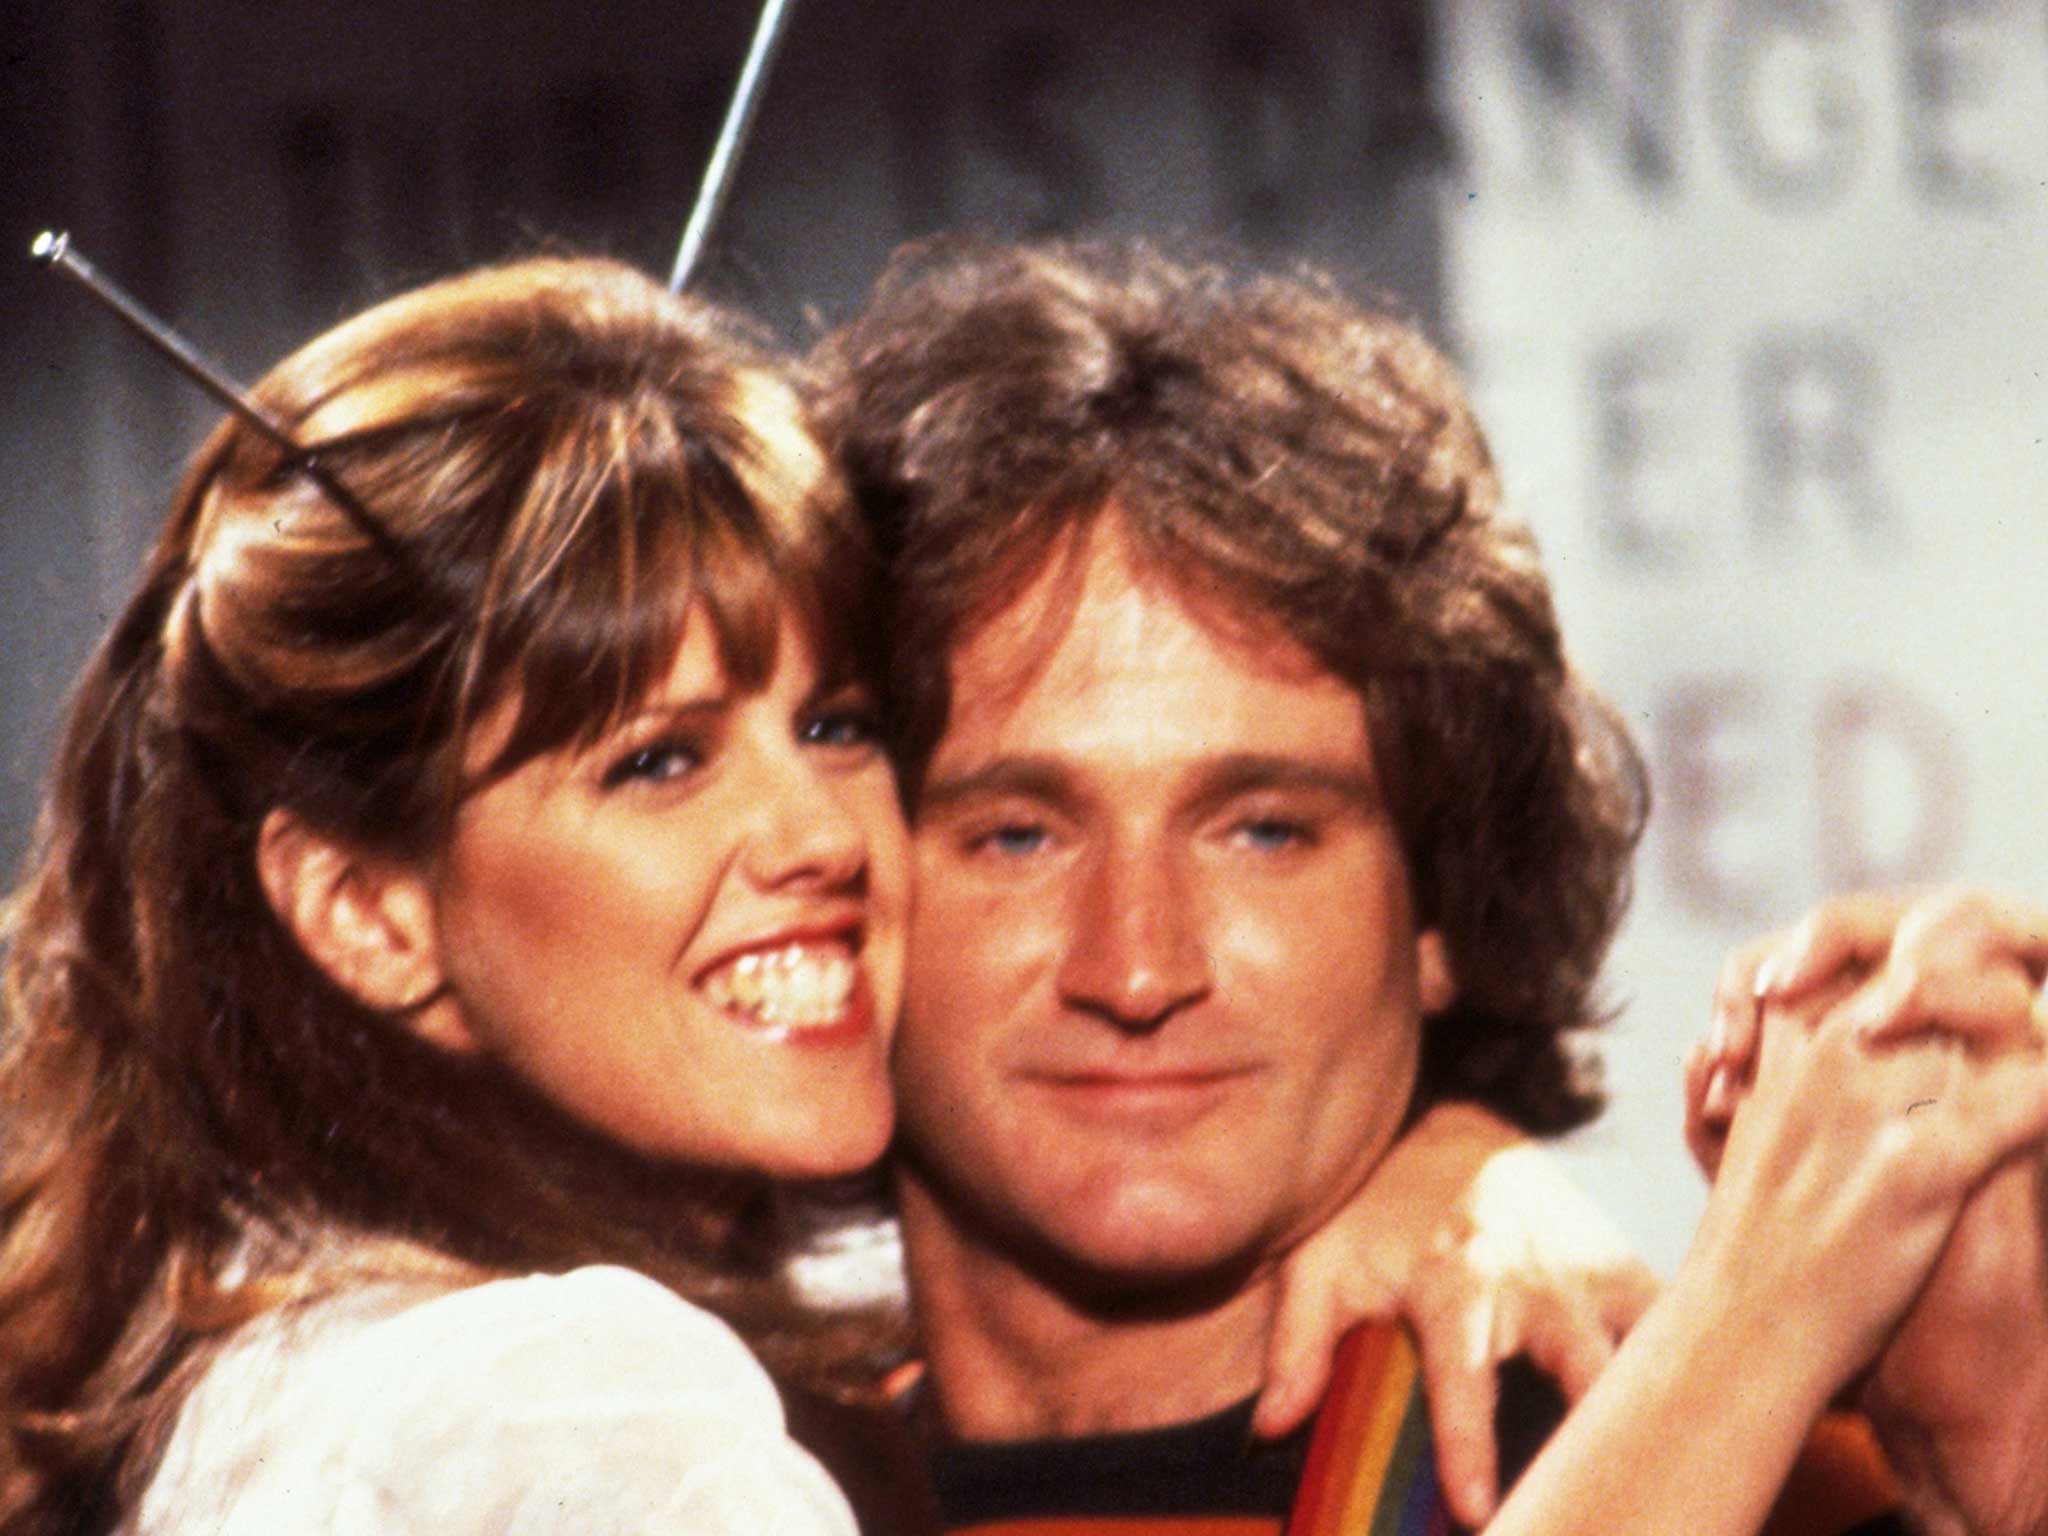 Robin Williams in 1980 with Pam Dawber, his co-star in the Mork and Mindy TV series